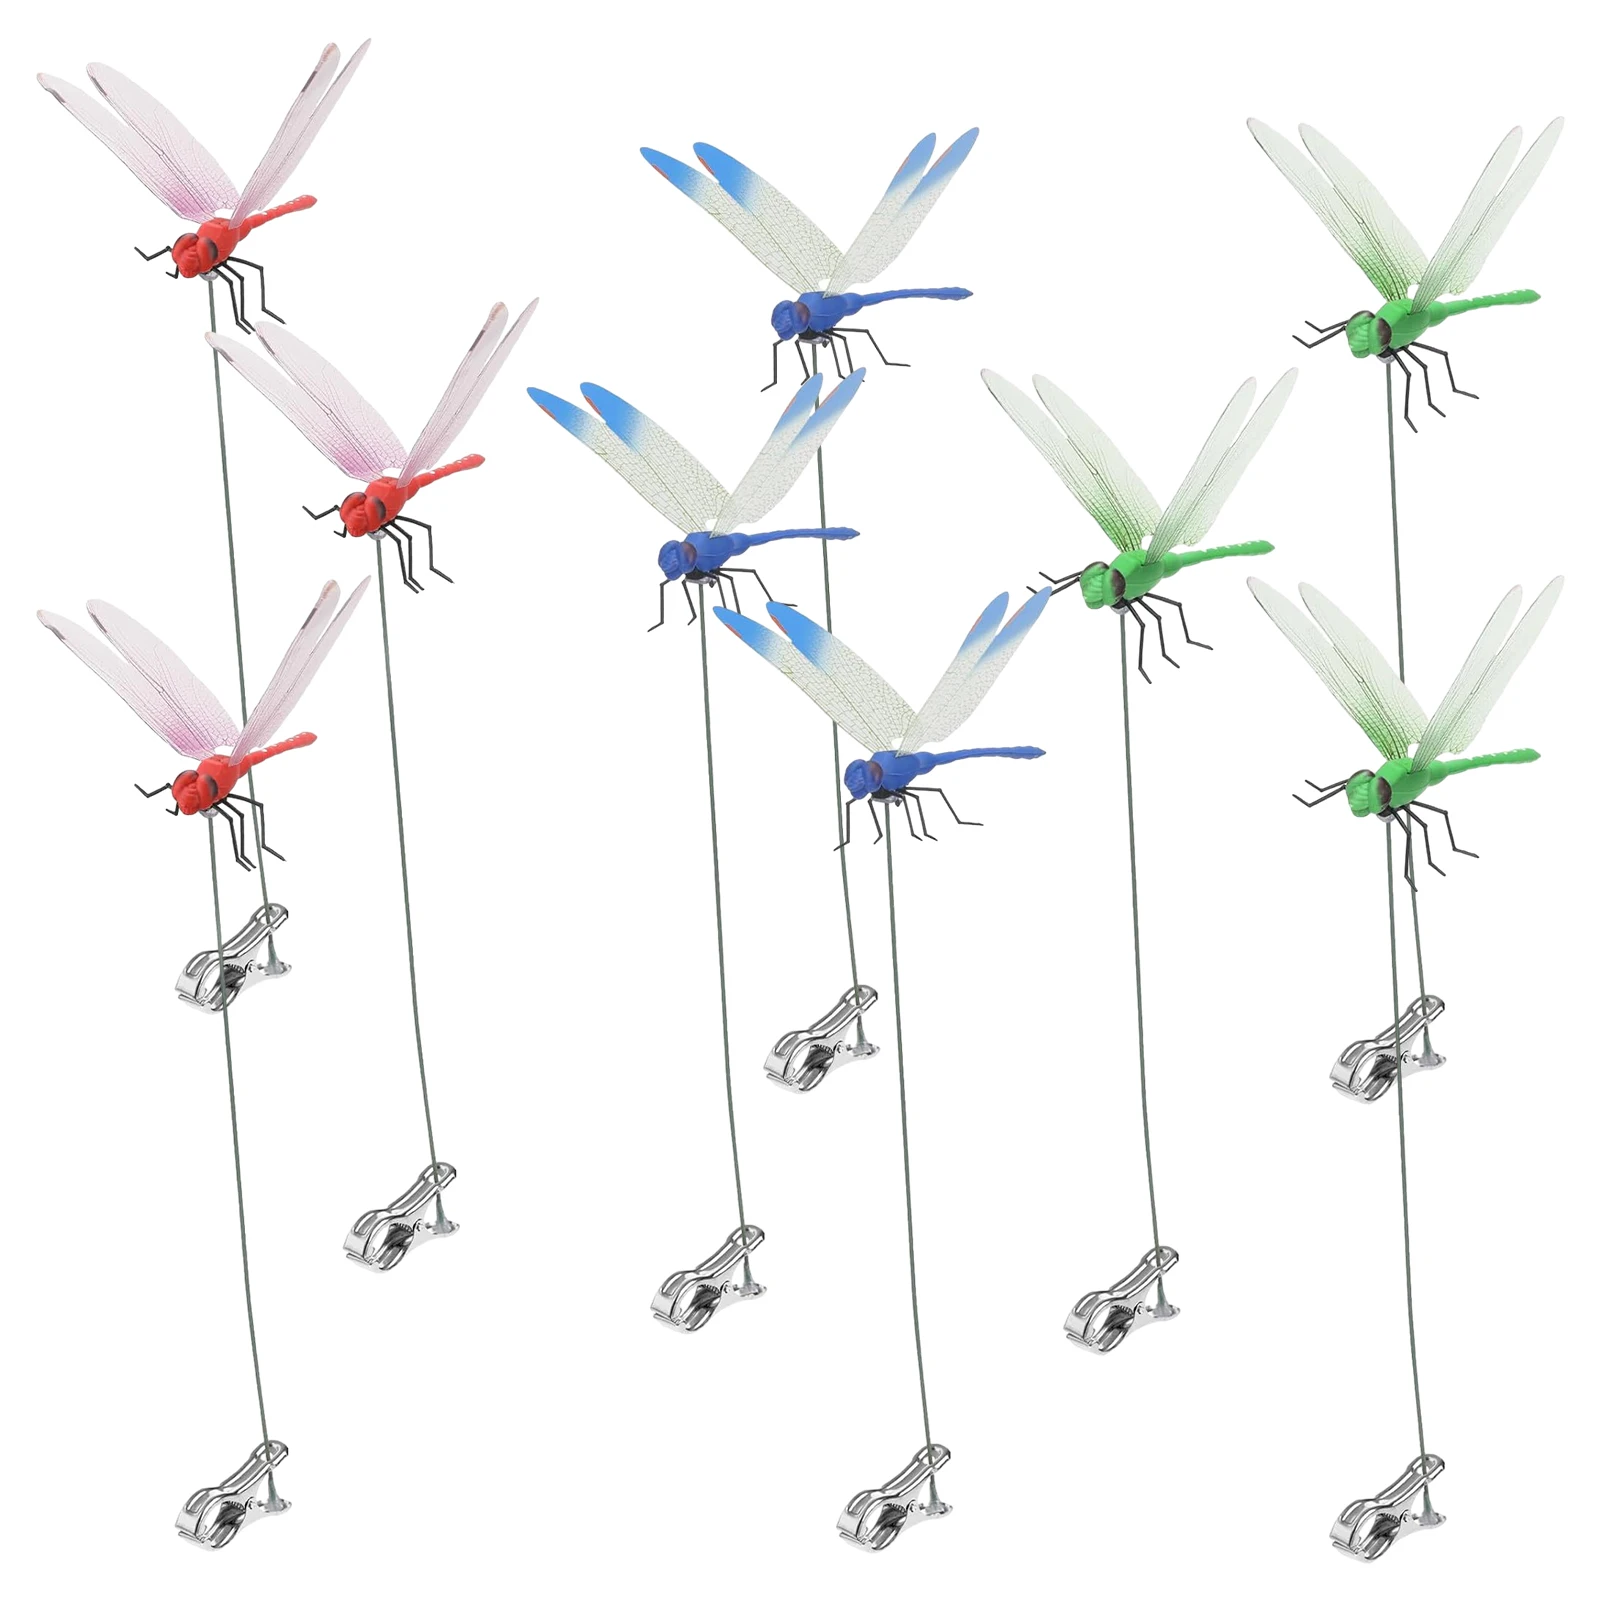 

9pcs/3sets Home Accessories Natural DIY Fake Dragonfly Pole Clip Hat Horse Fly Deterrent Reusable 3D Multicolored Garden Decor